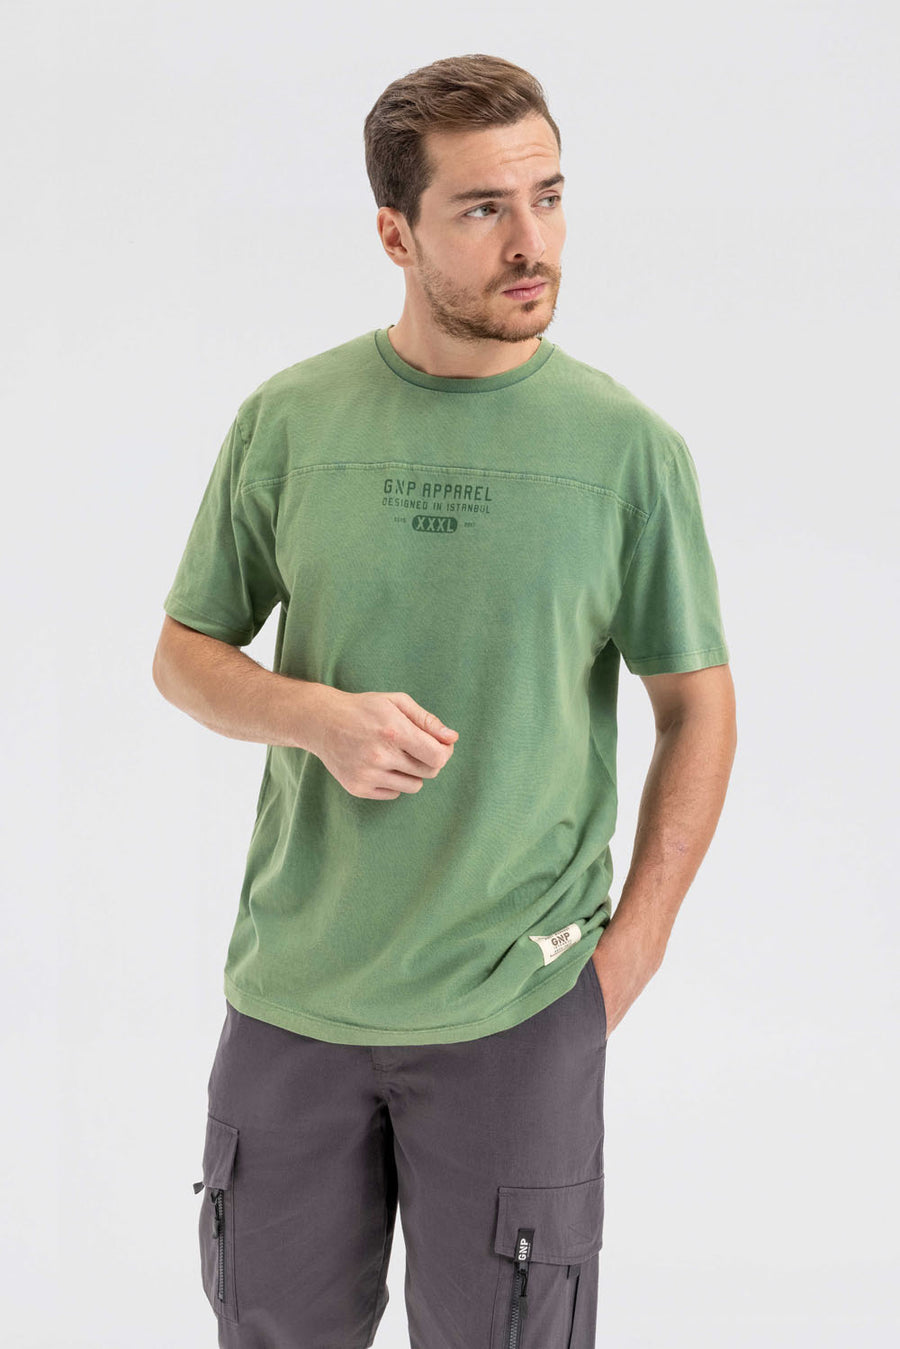 GNP Acid Washed Cut And Sew Green T-Shirt 